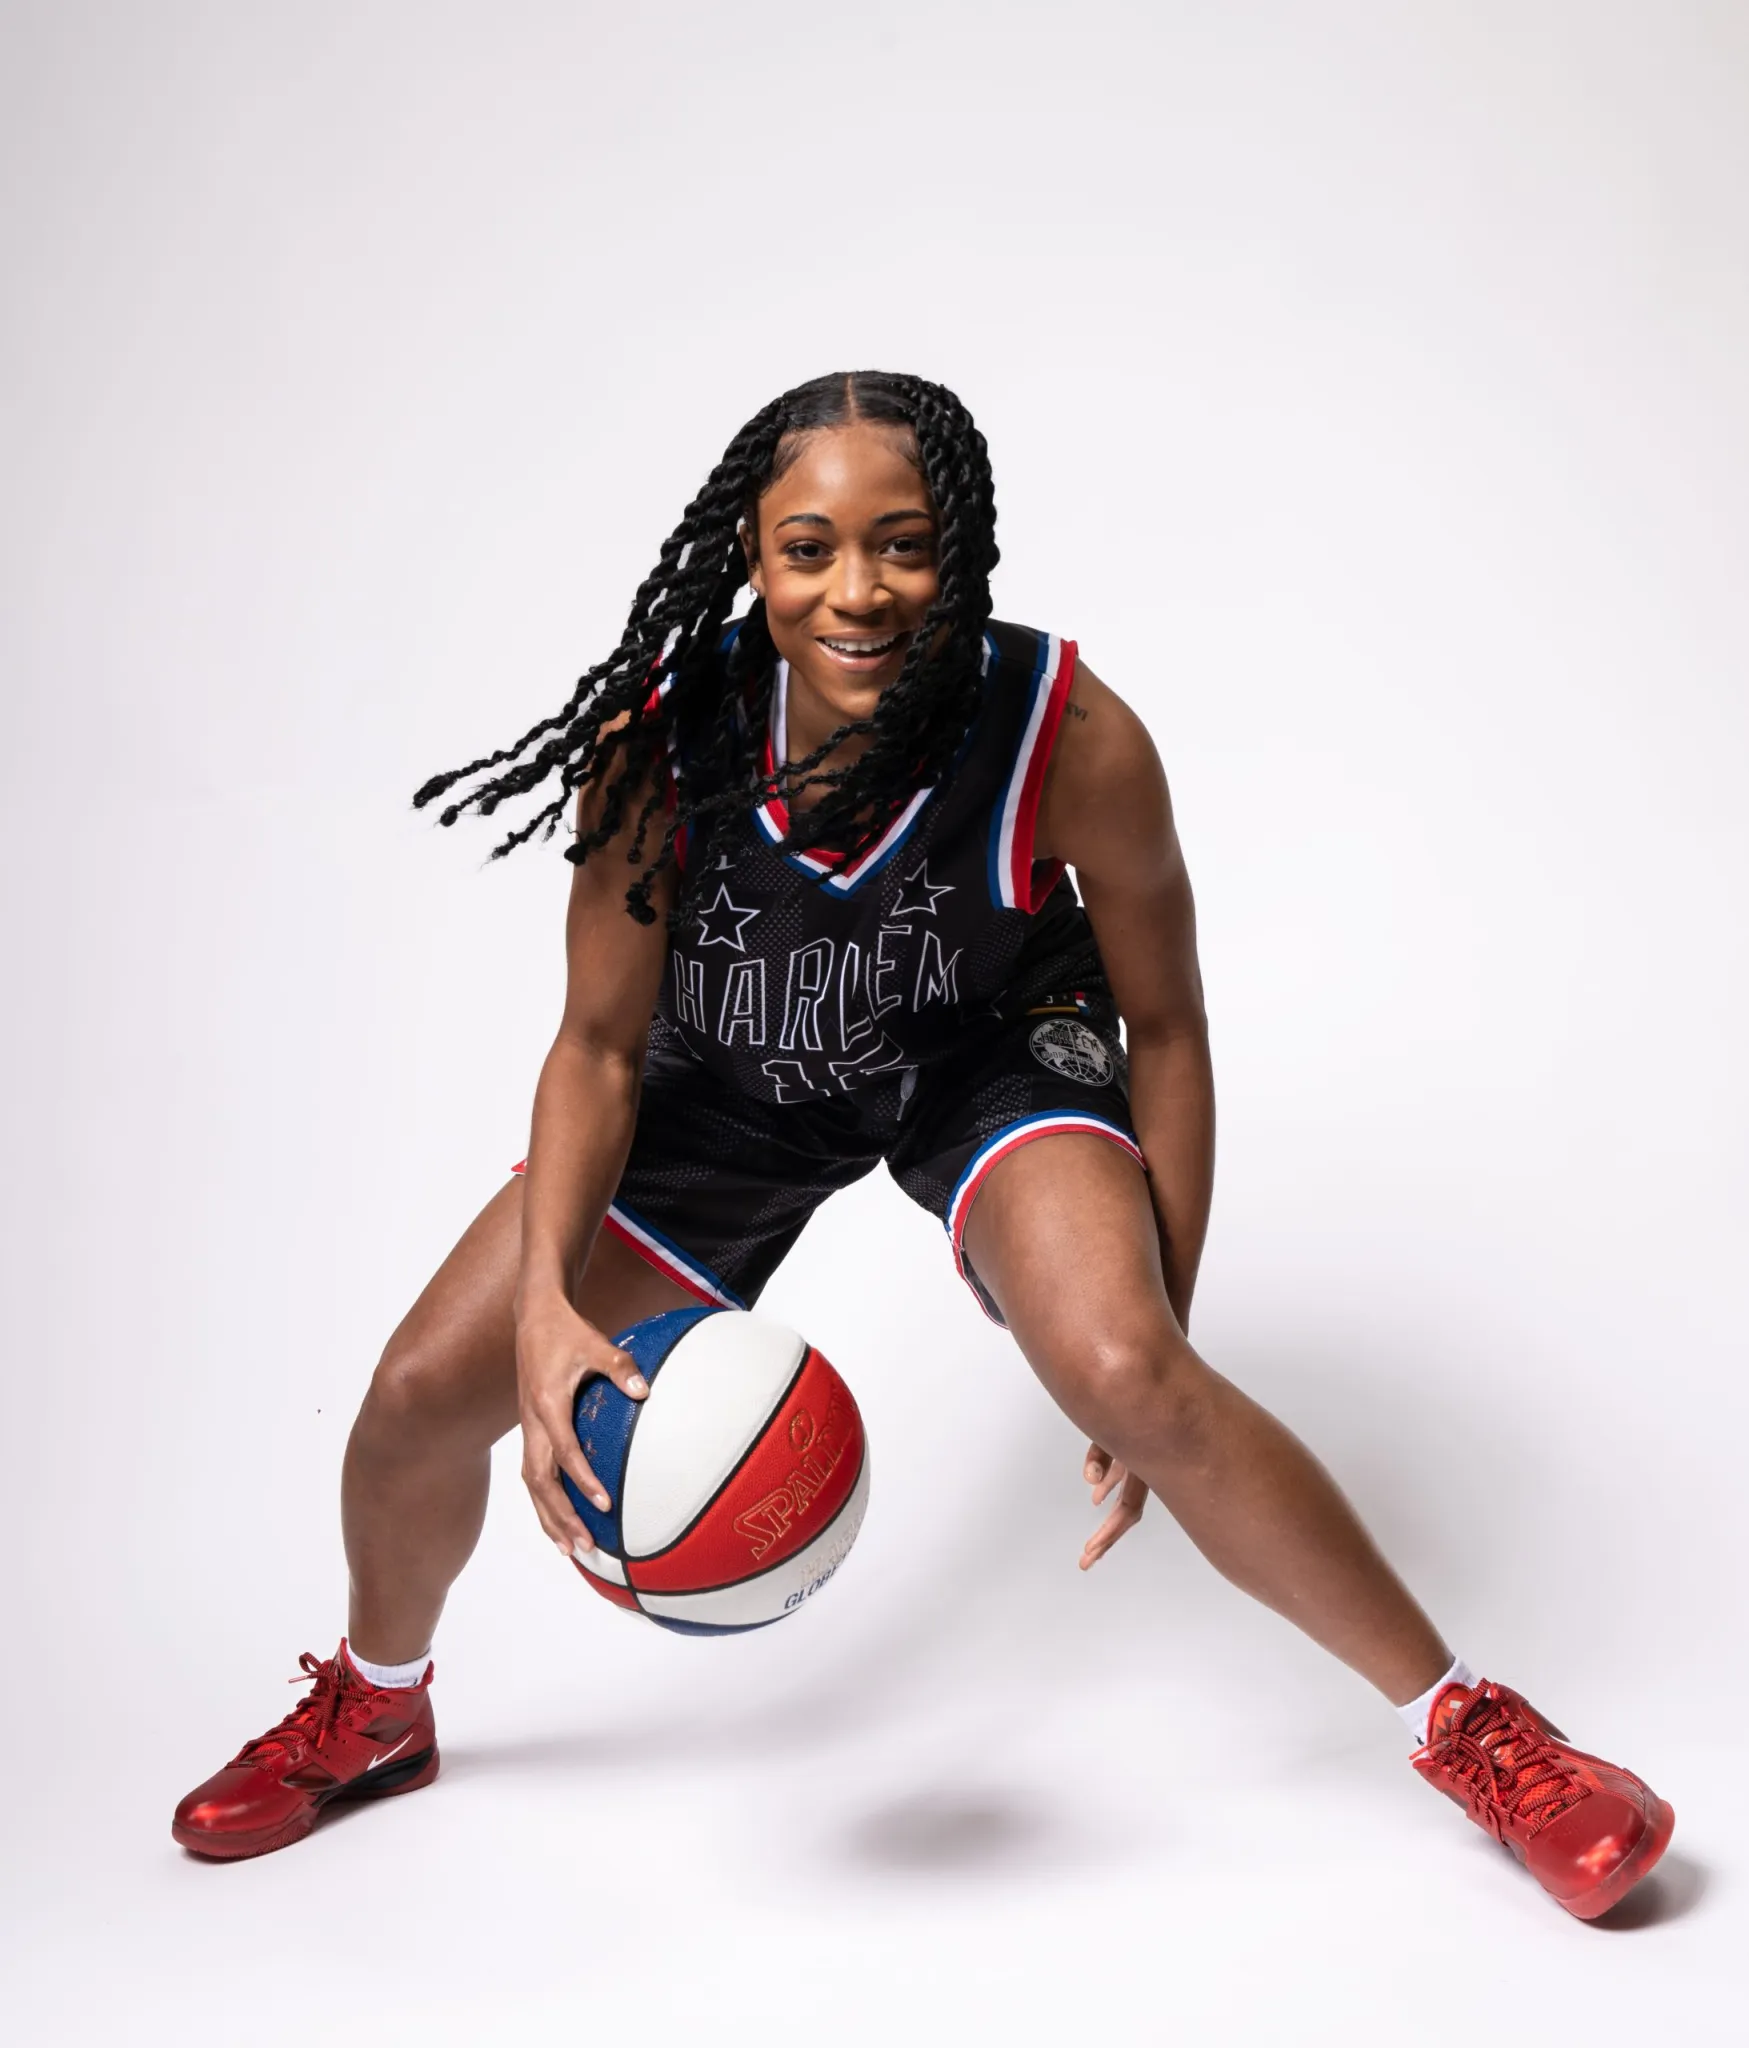 National champion Alexis Morris joins the Harlem Globetrotters